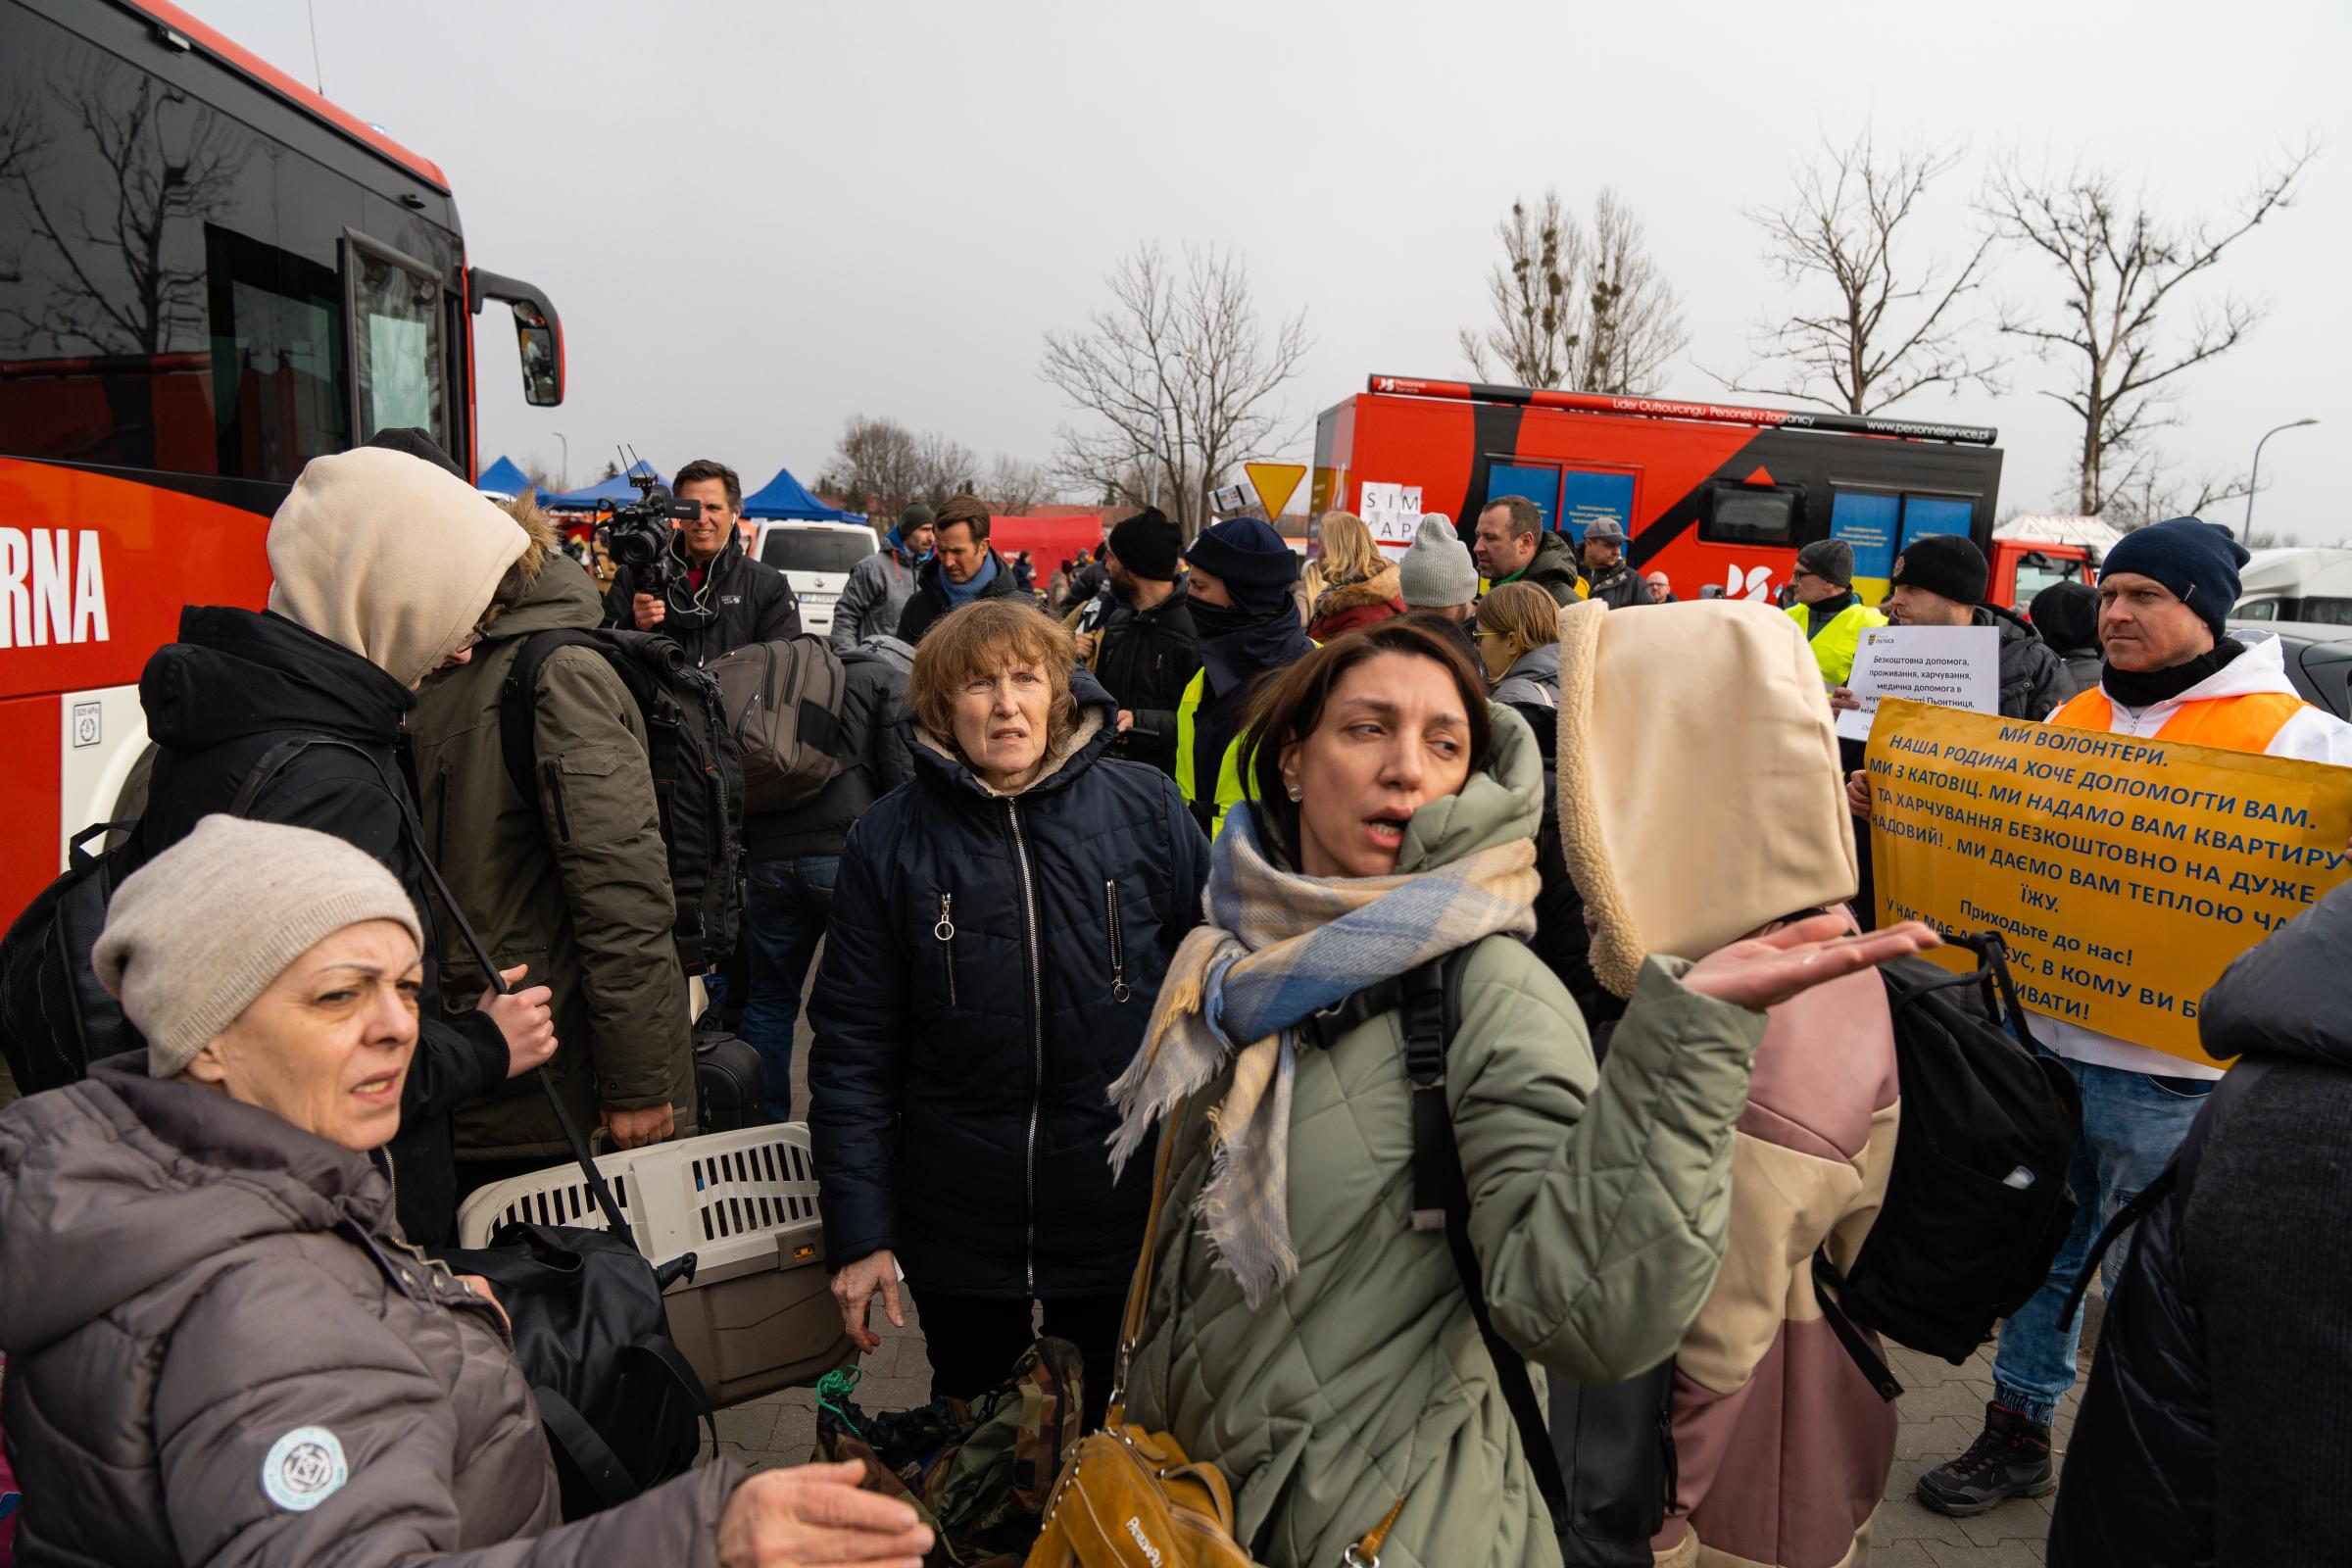 Families made up largely of women and children arrive at Przemysl refugee reception centre in Poland after crossing the border from Ukraine. Picture: Ronan McGrade